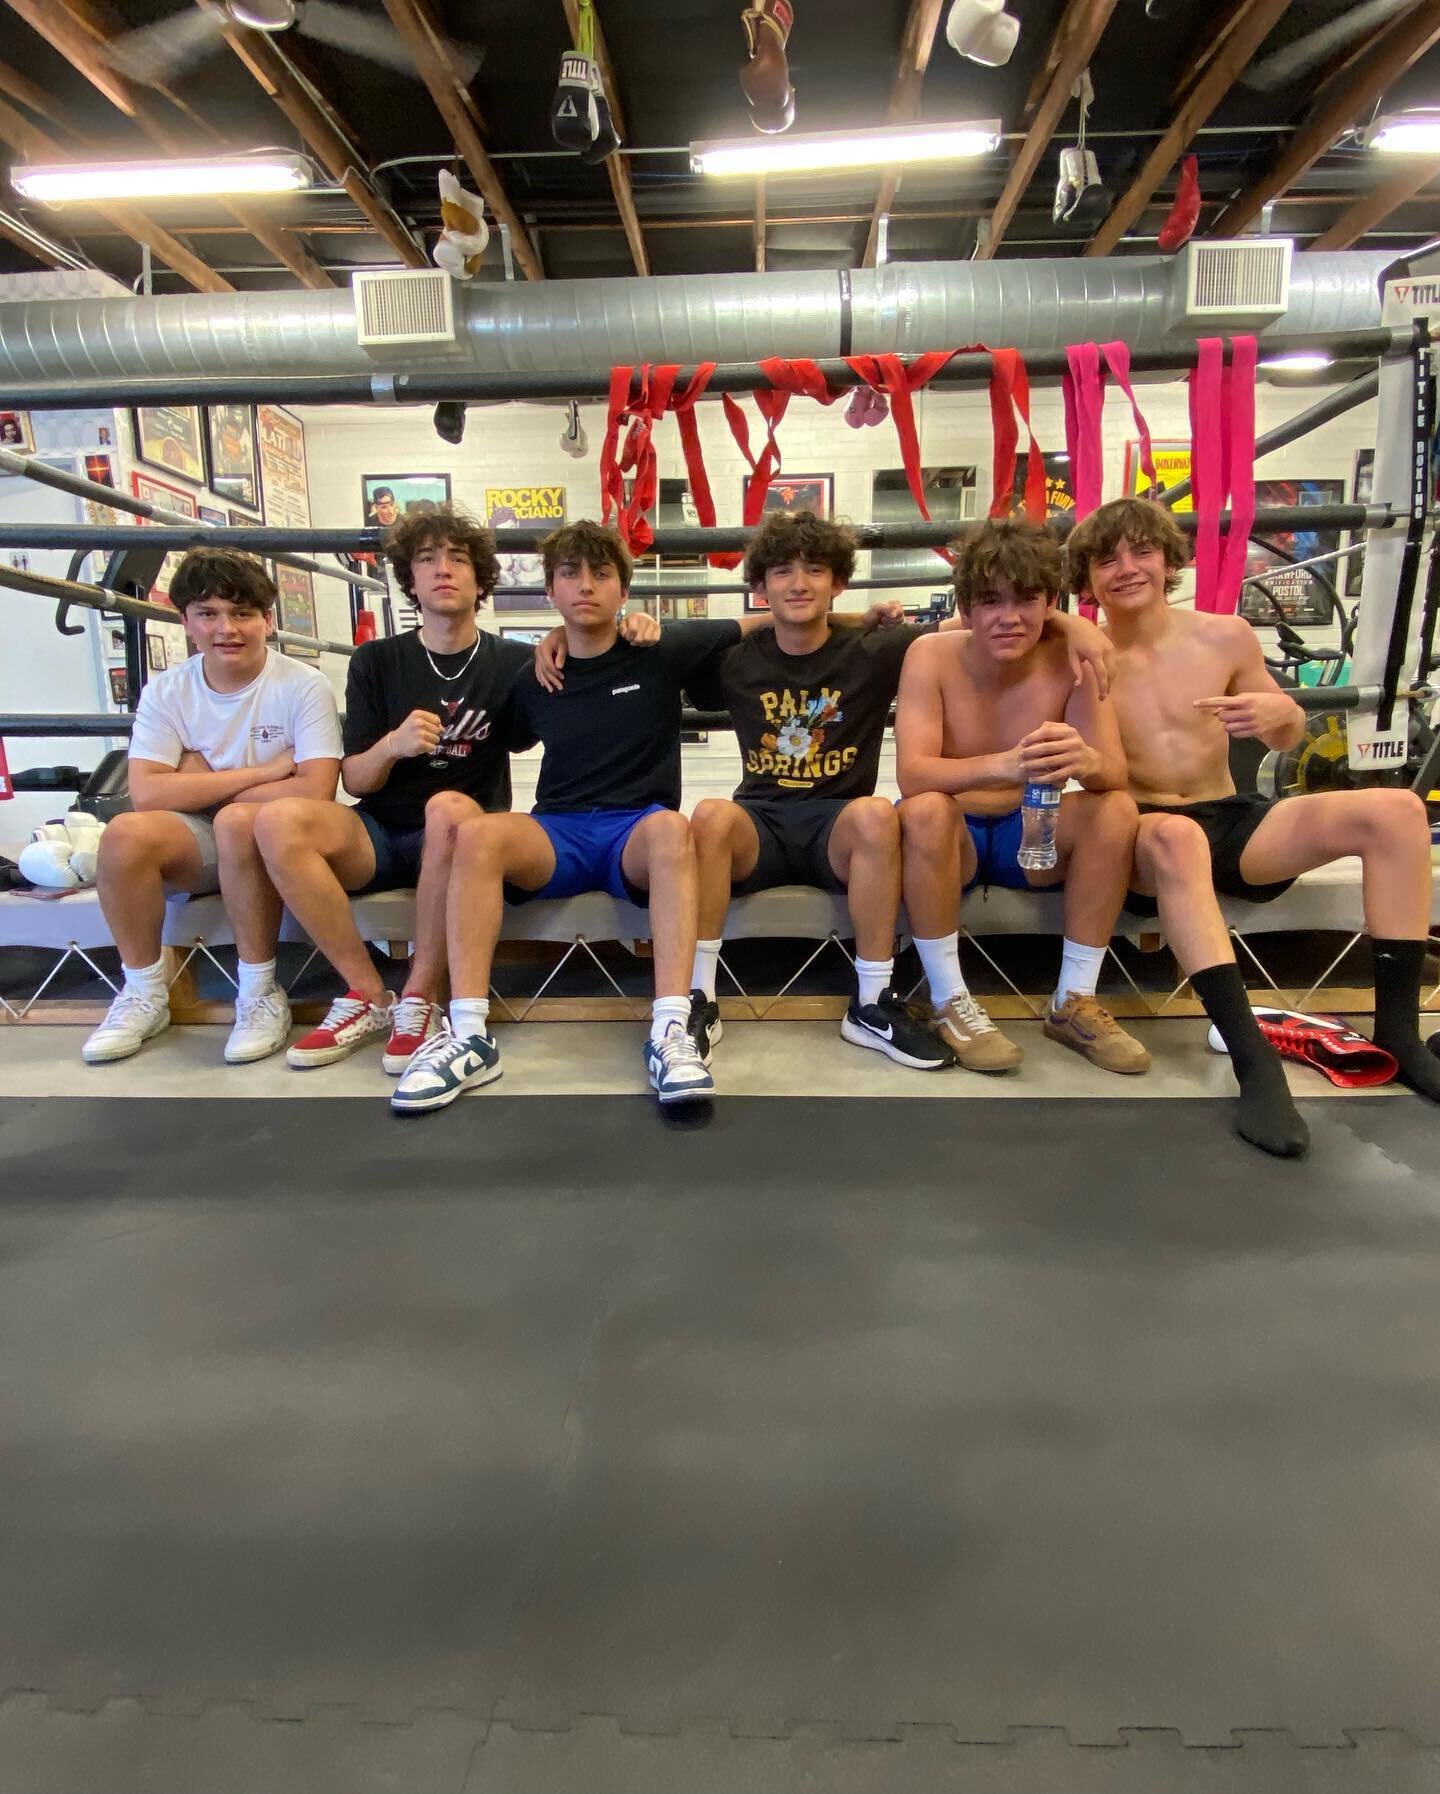 The Boys ⚔️

#proper #boxing #properboxing #phoenix #sparring #arizona #theboys #workout #work #familytime #family #striveforgreatness